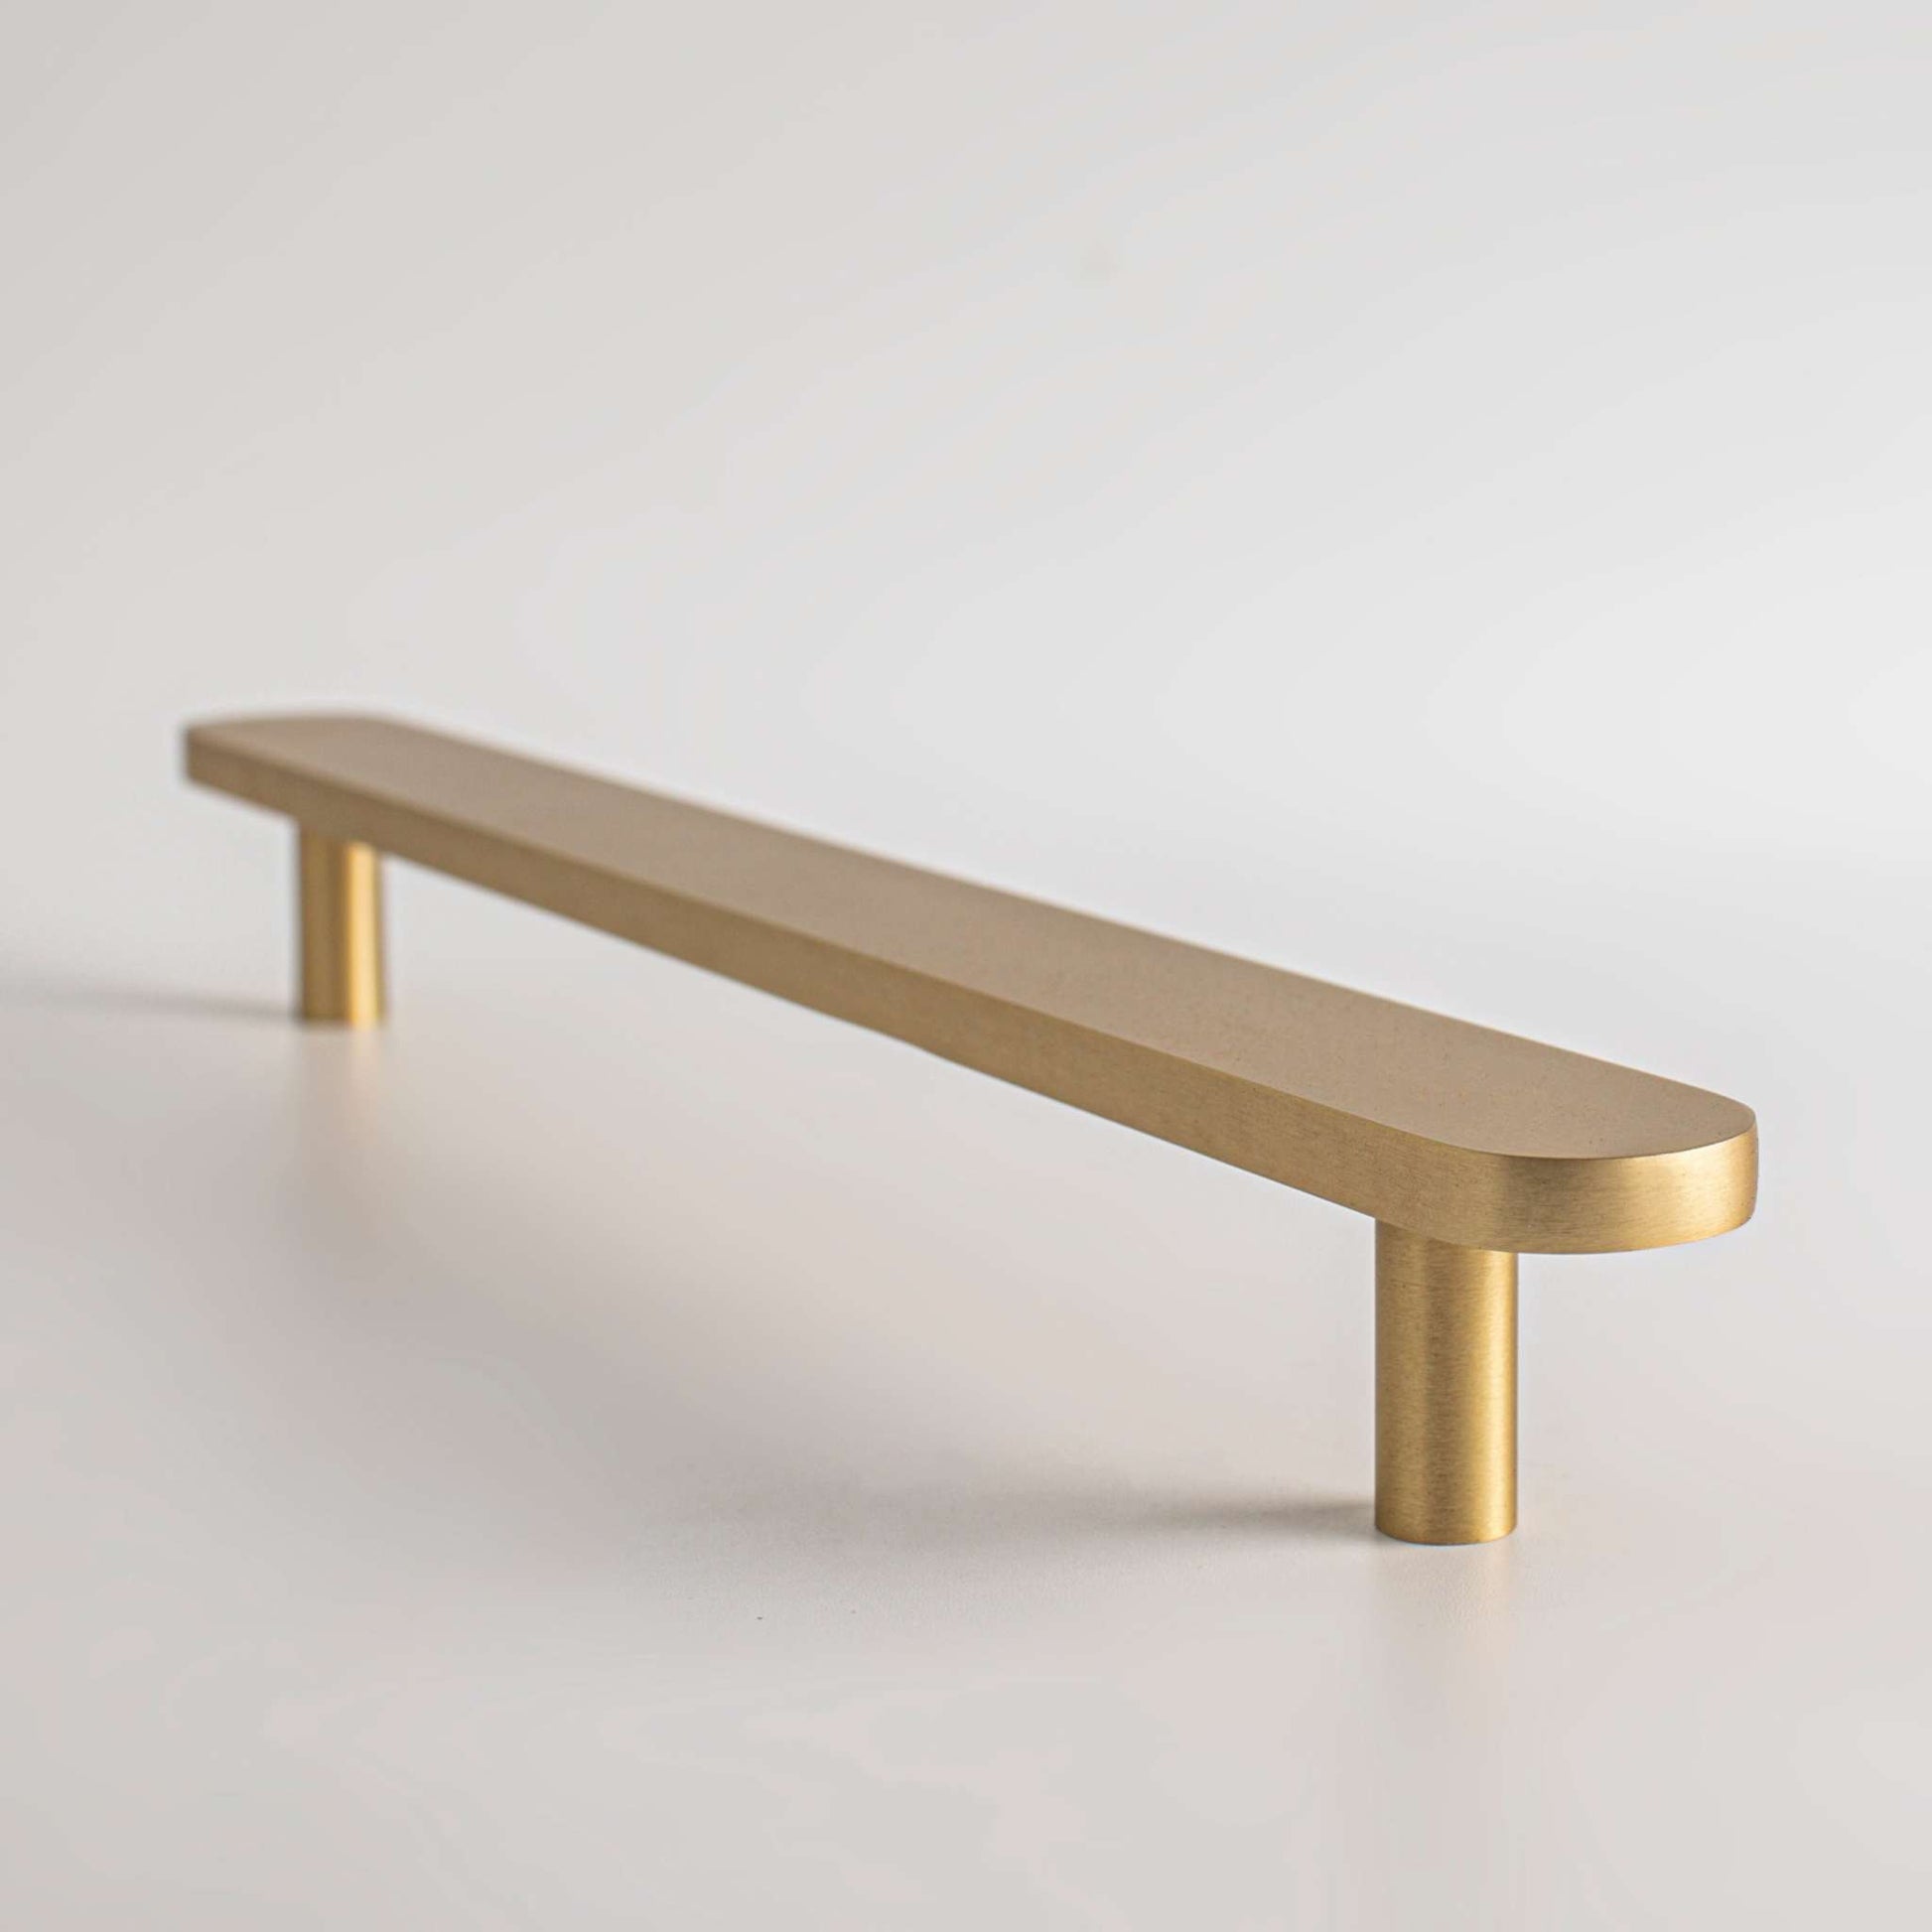 Orbital, Solid Brass Cabinet Pulls


Our Orbital Pull adds a touch of simplicity to any contemporary design project. The solid brass construction has an incredible weight in the hand, ensuring it wilpullOrbital, Solid Brass Cabinet Pulls